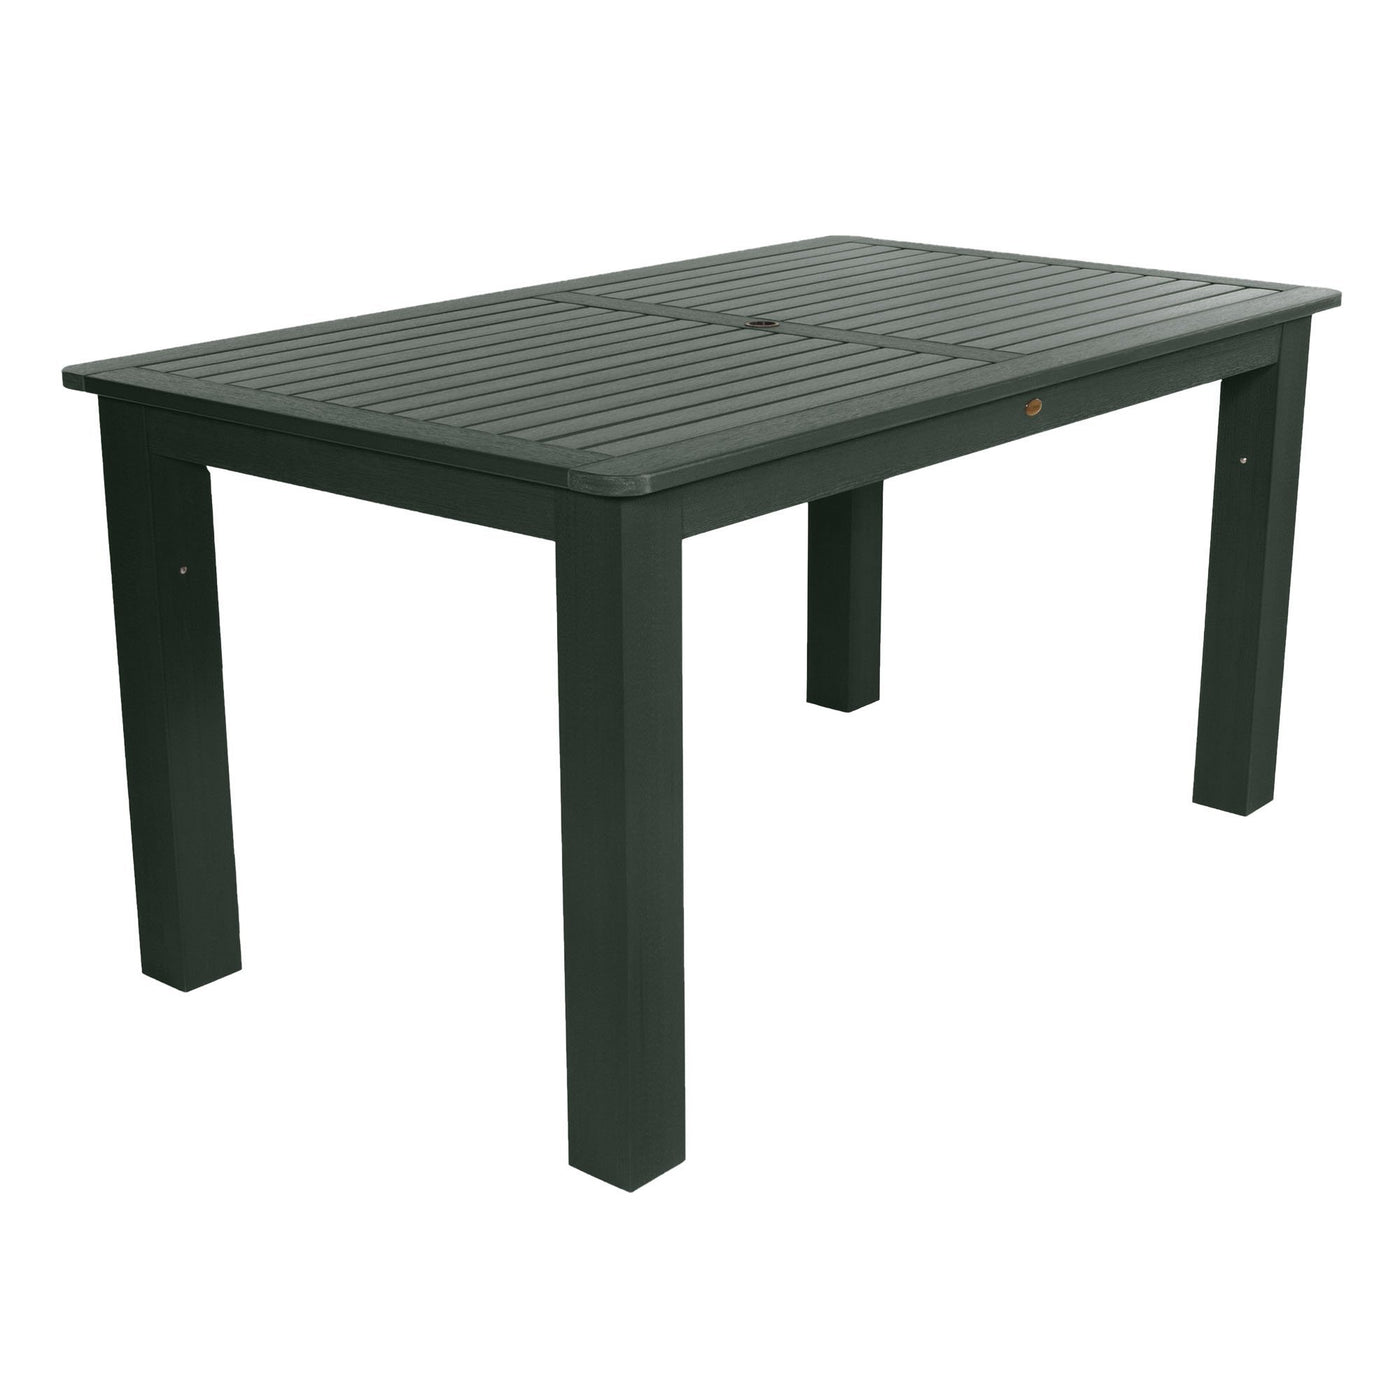 Rectangular 42in x 72in Outdoor Dining Table - Counter Height Dining Highwood USA Charleston Green 